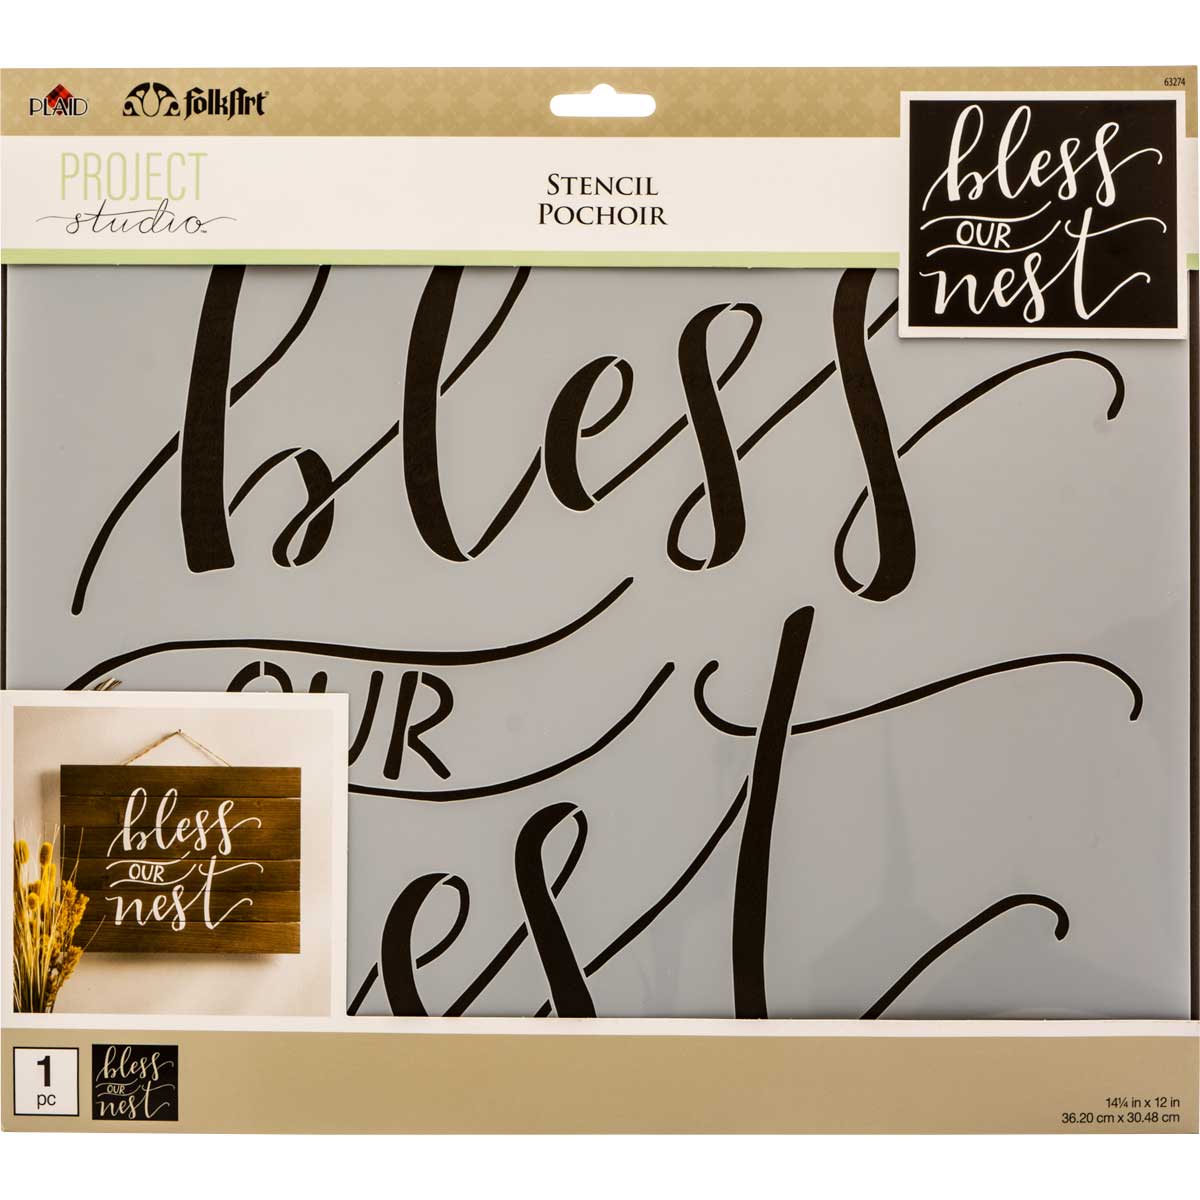 FolkArt ® Painting Stencils - Sign Making - Project Studio™ Bless Our Nest - 63274